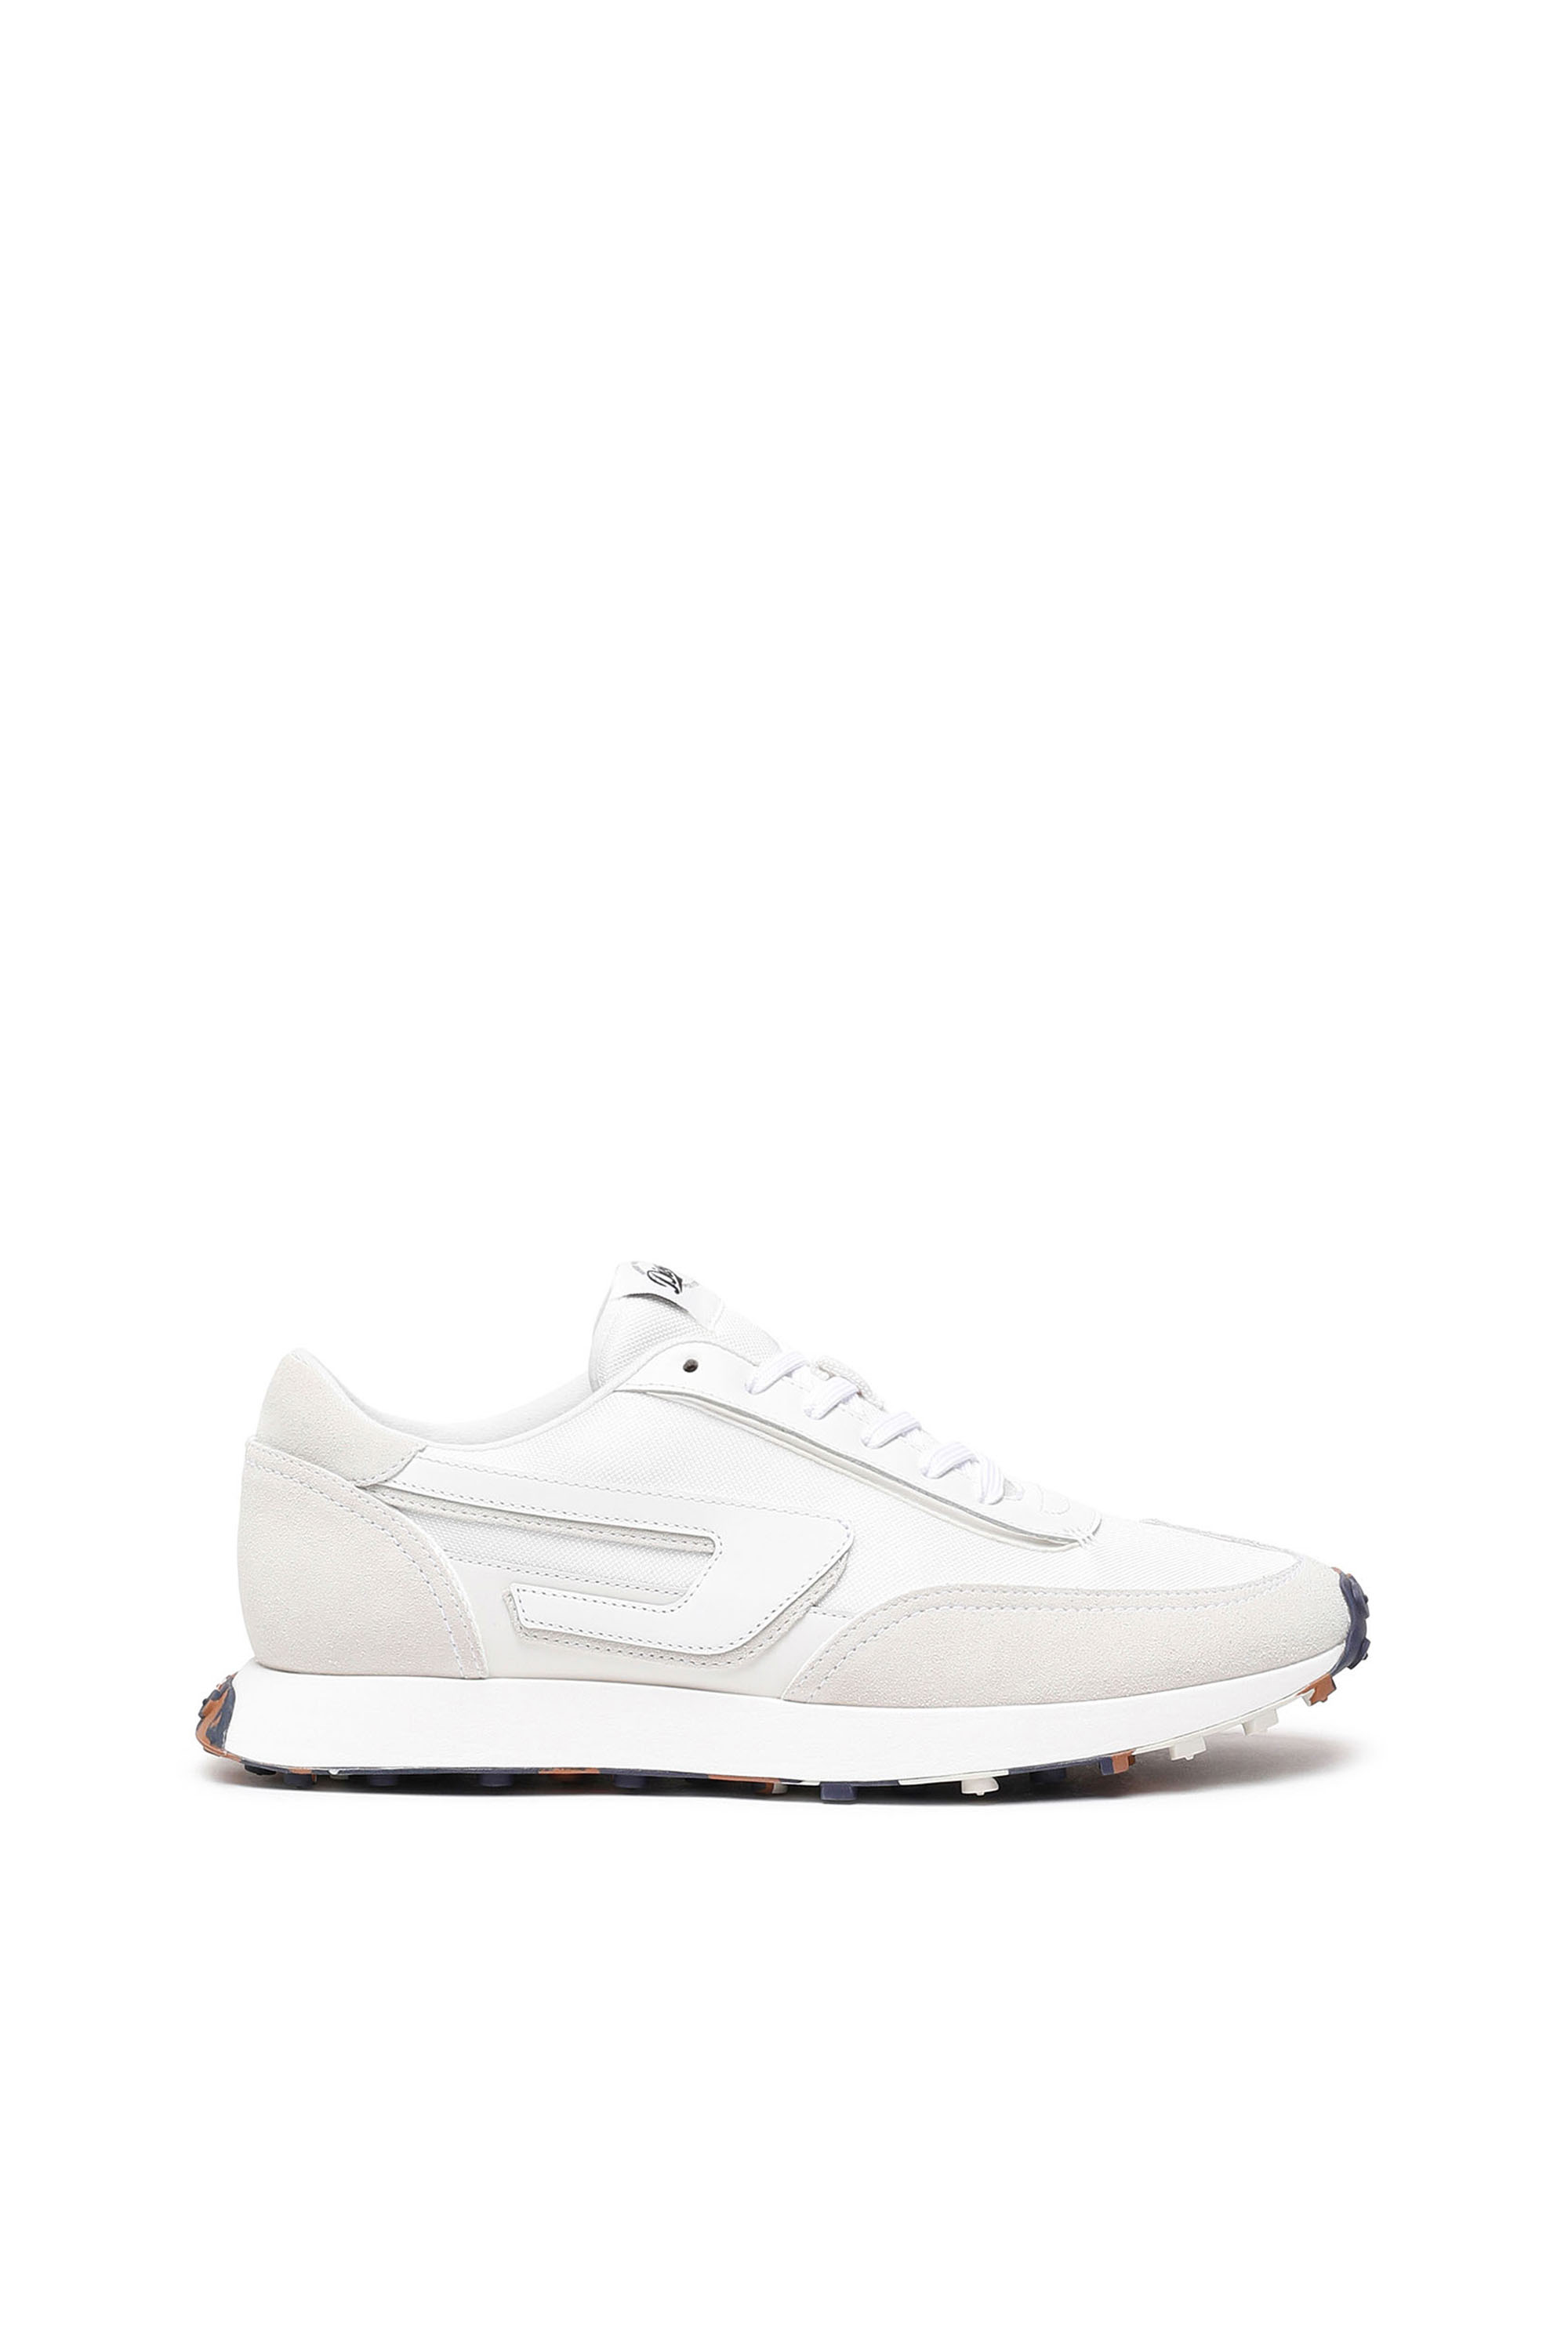 Diesel Mesh And Suede Sneakers With Camo Sole In White